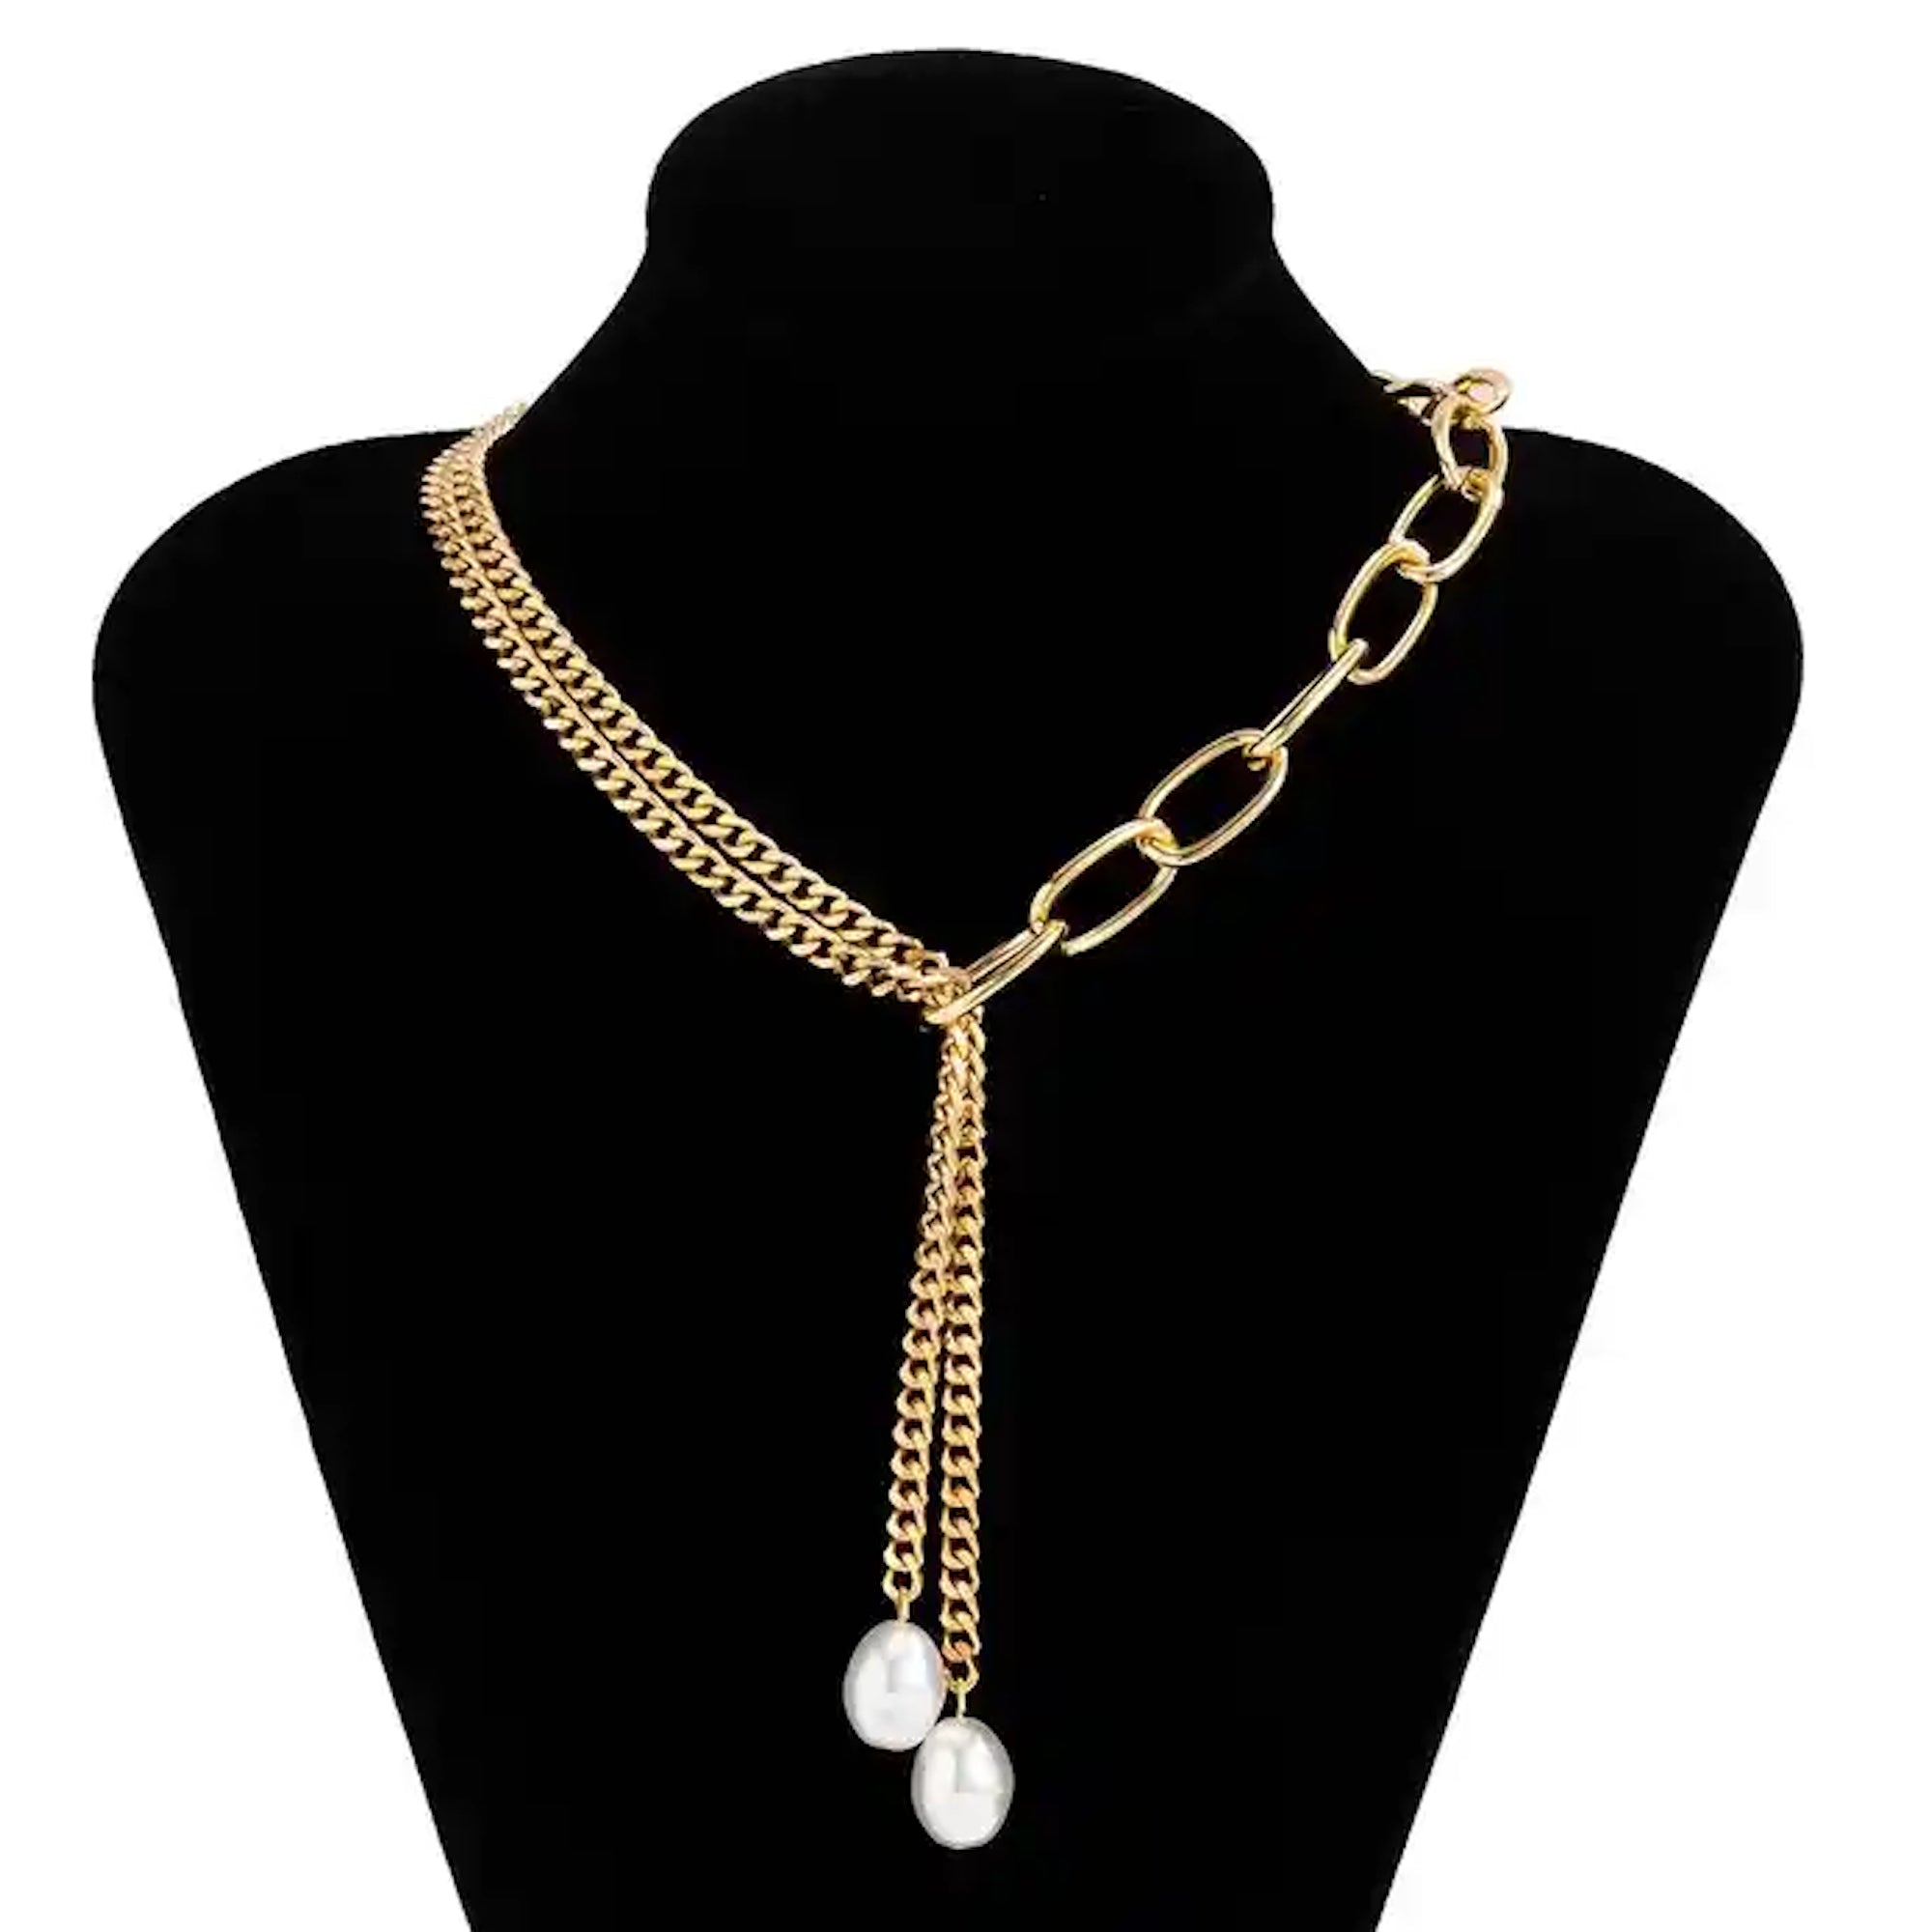 Rocksbox: Ariel Half Pearl and Half Chain Necklace by Perry Street